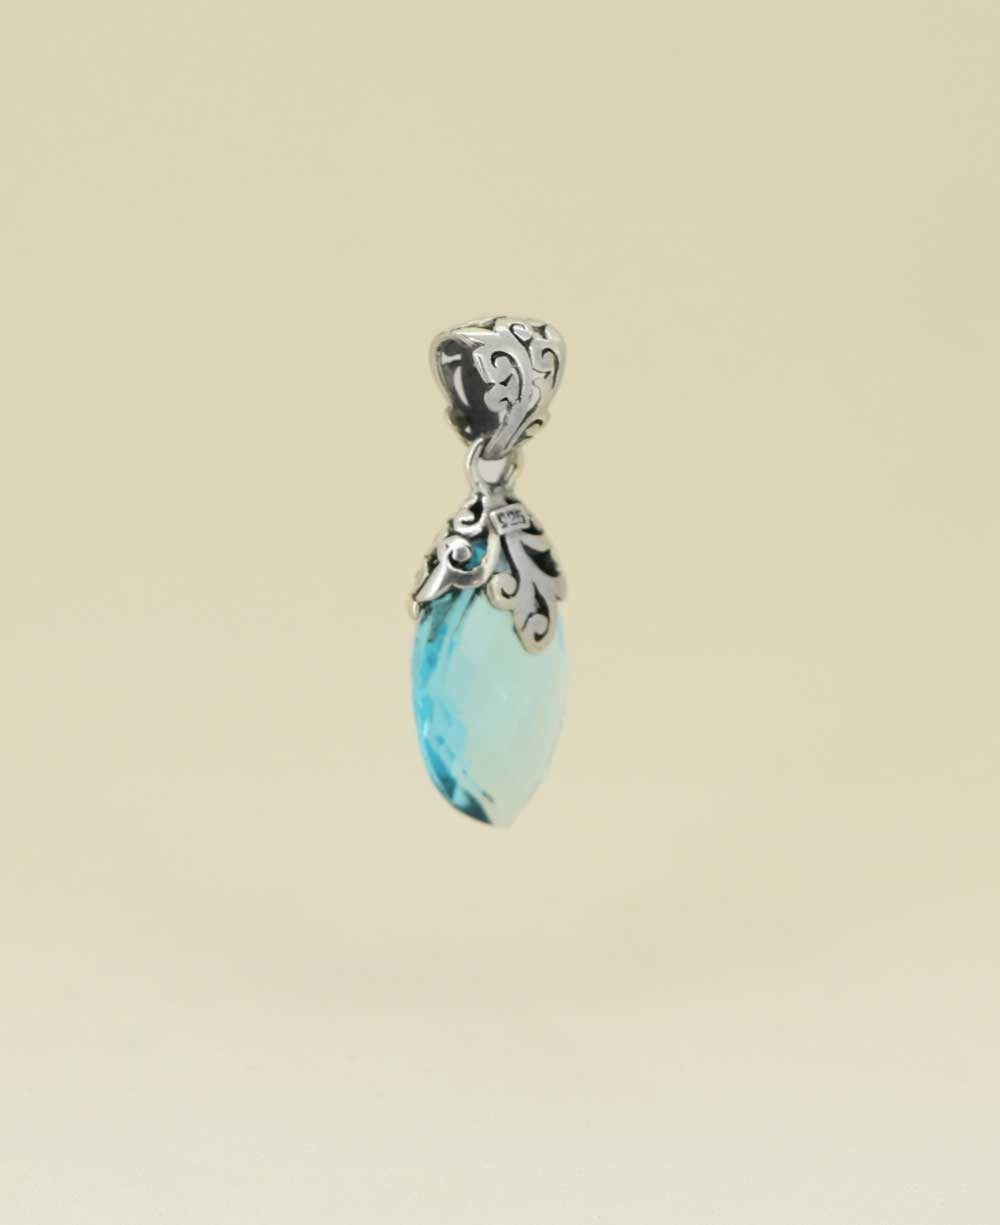 Almond-shaped-blue-topaz-pendant-with-floral-bail